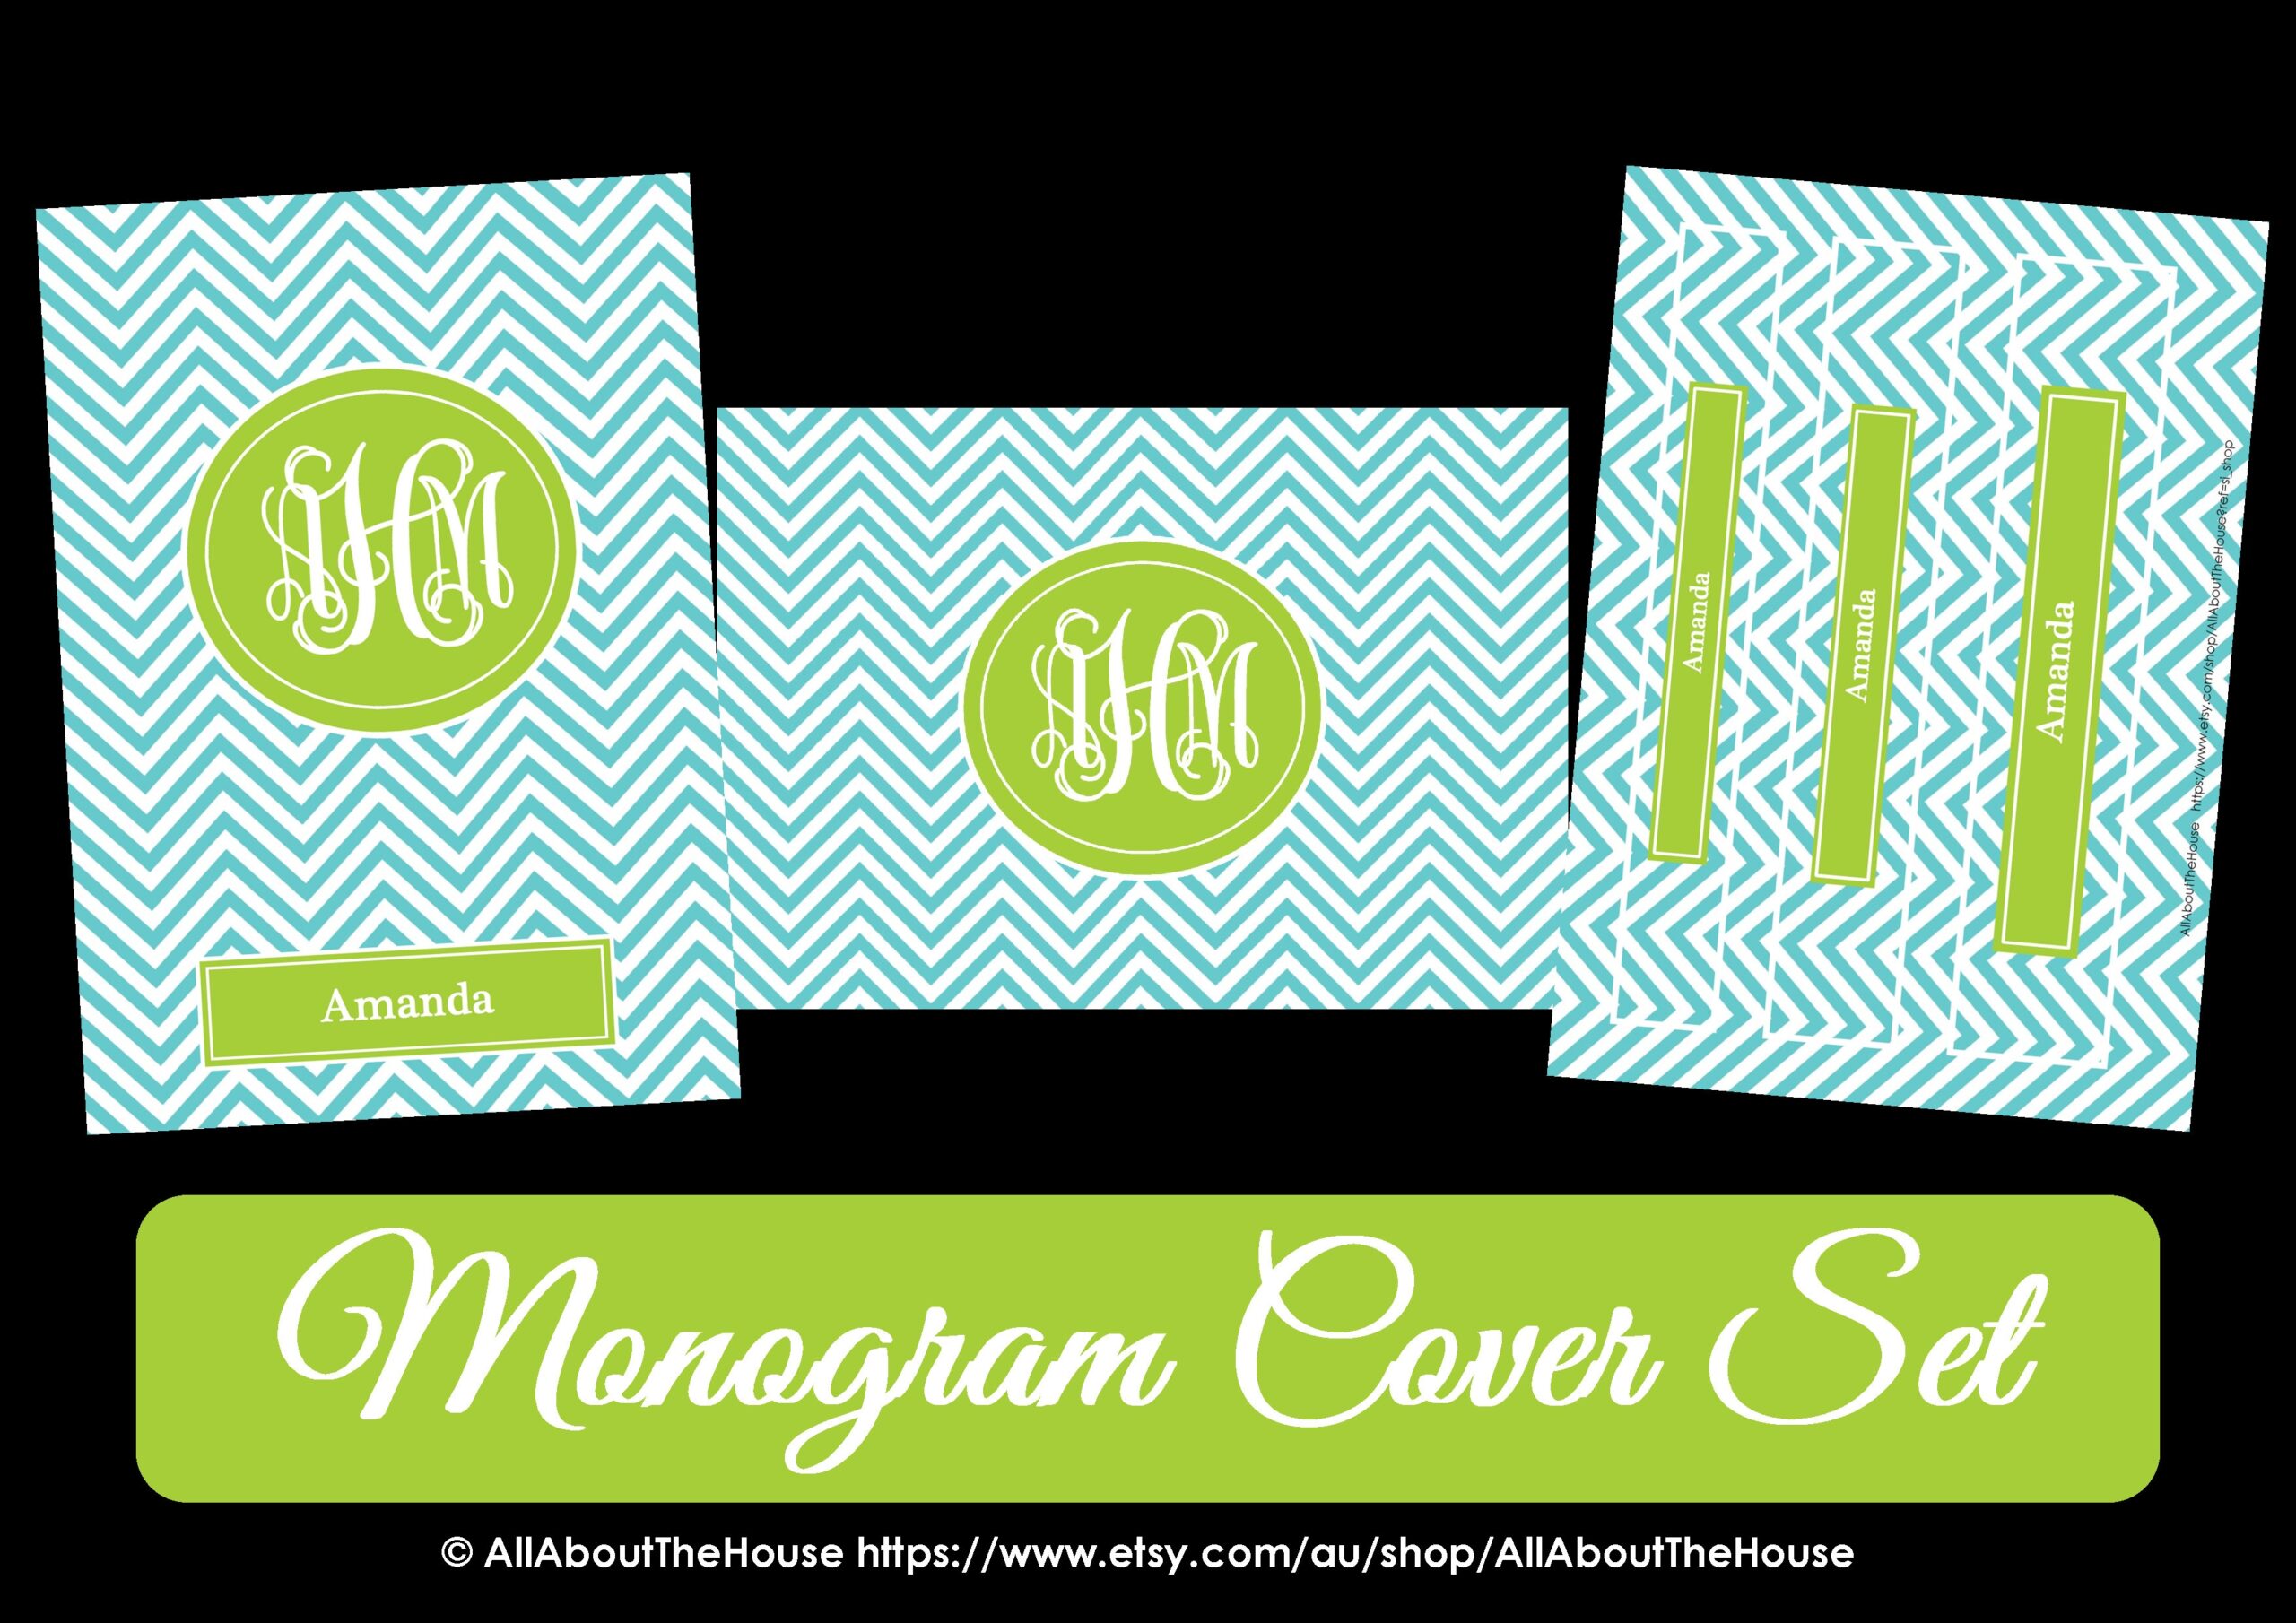 Binder Covers AllAboutTheHouse Printables - Free Printable Monogram Binder Covers